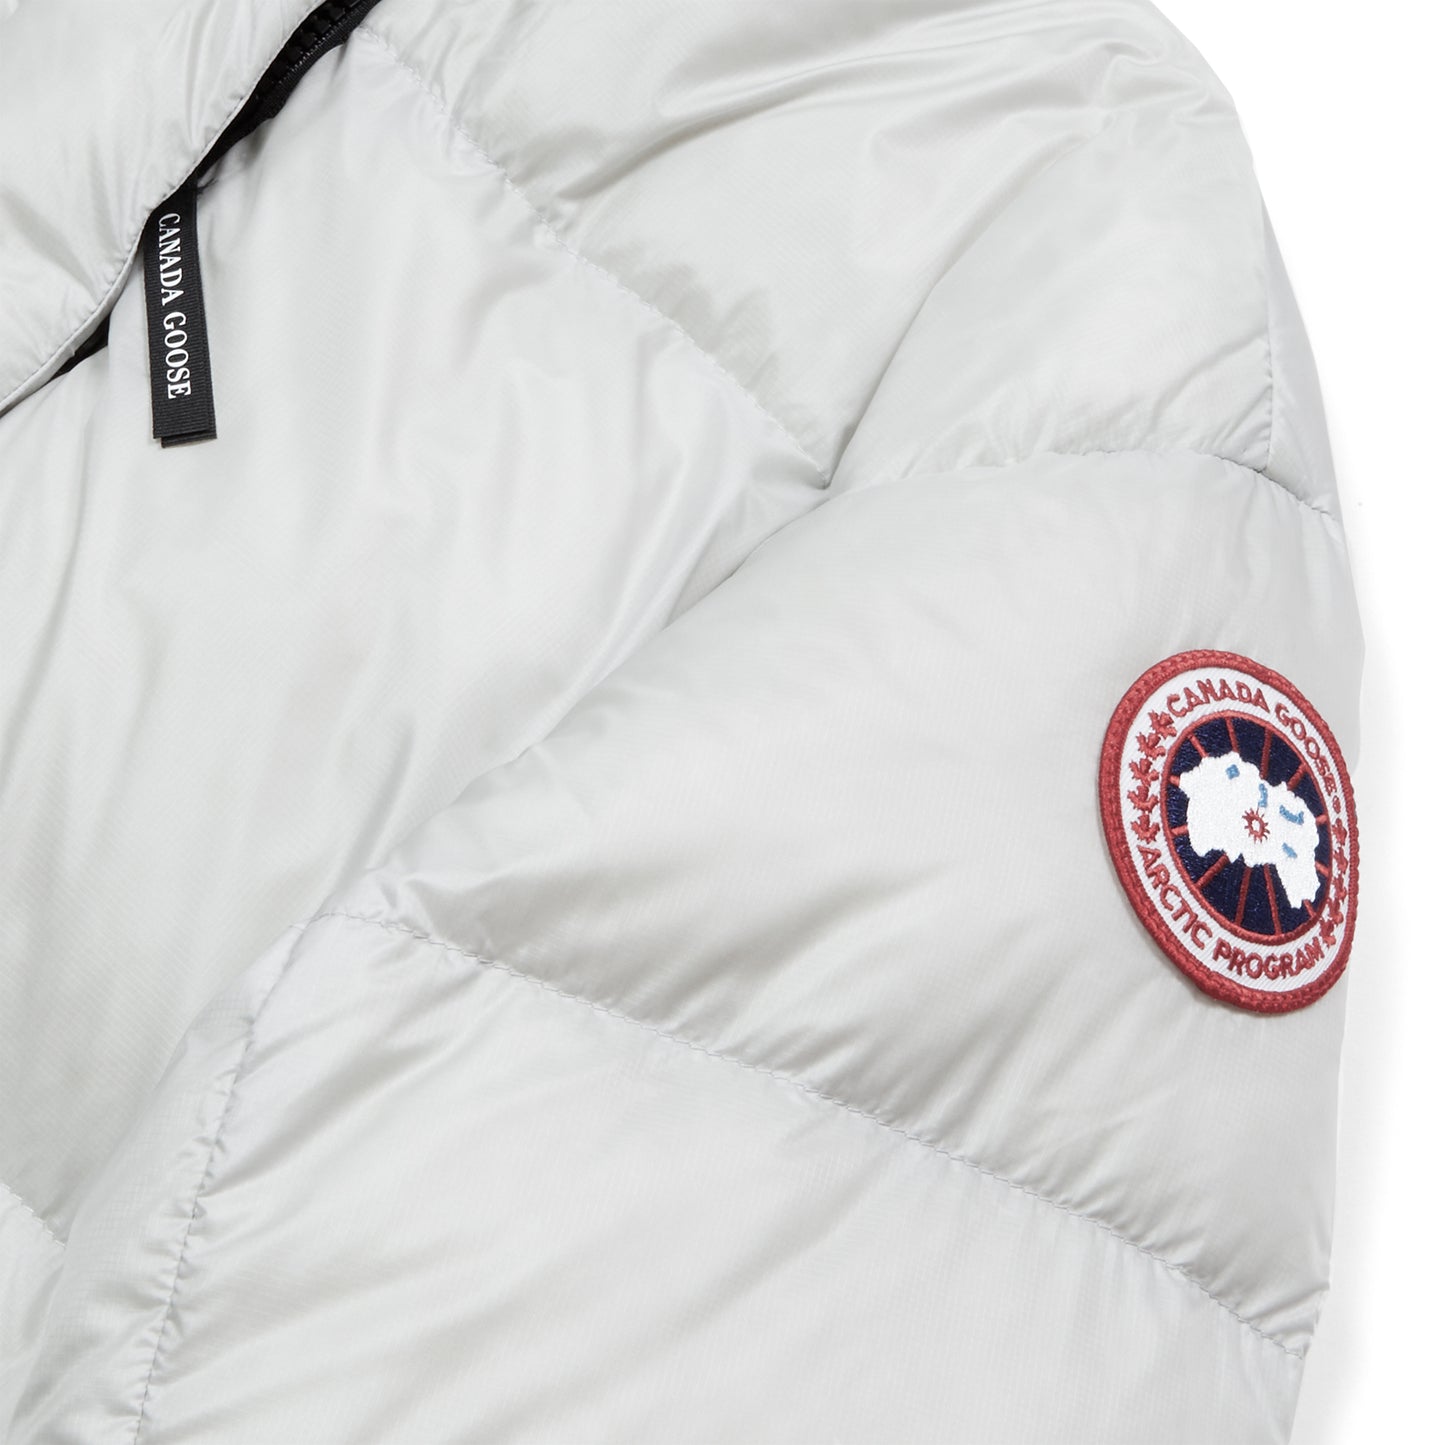 Canada Goose Womens Cypress Cropped Puffer (Silverbirch)